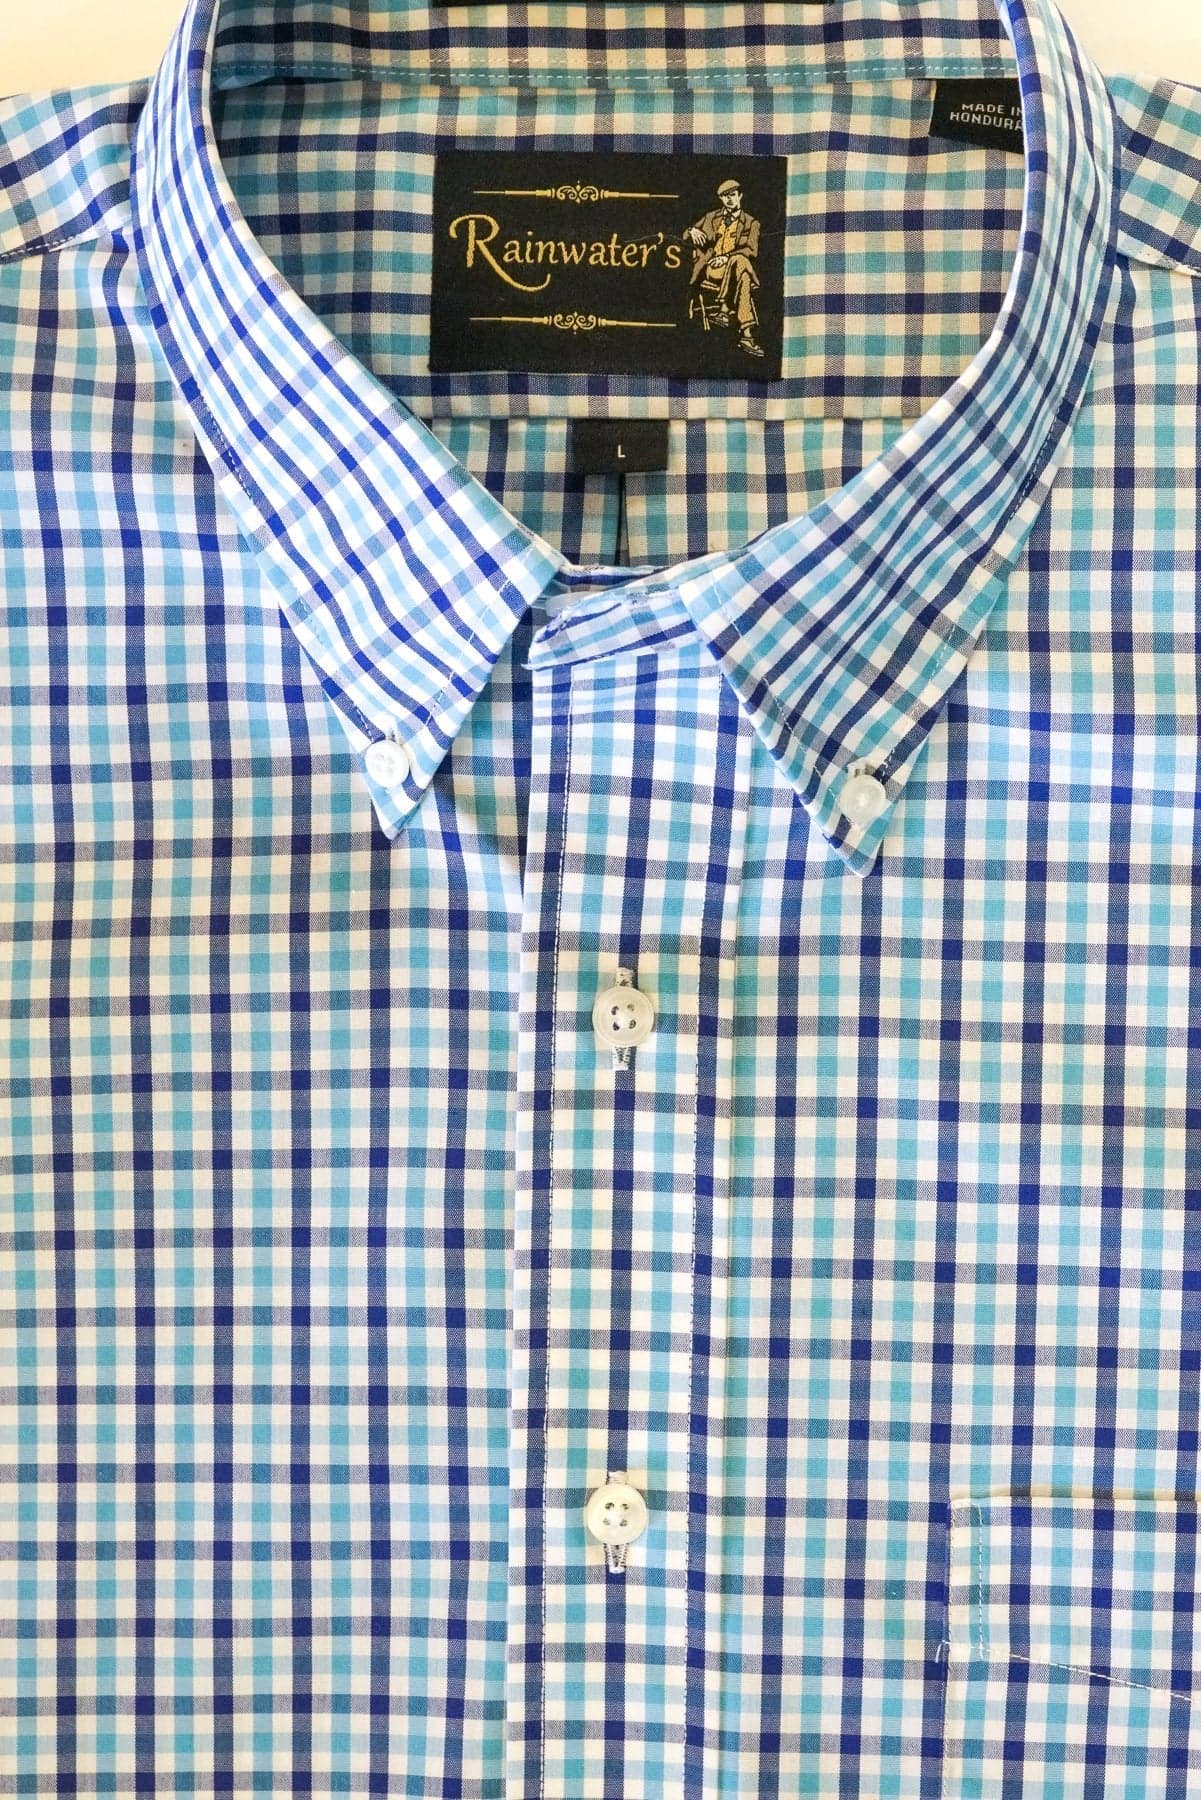 Navy & Teal Plaid Check Wrinkle Free Sport Shirt by Rainwater's - Rainwater's Men's Clothing and Tuxedo Rental